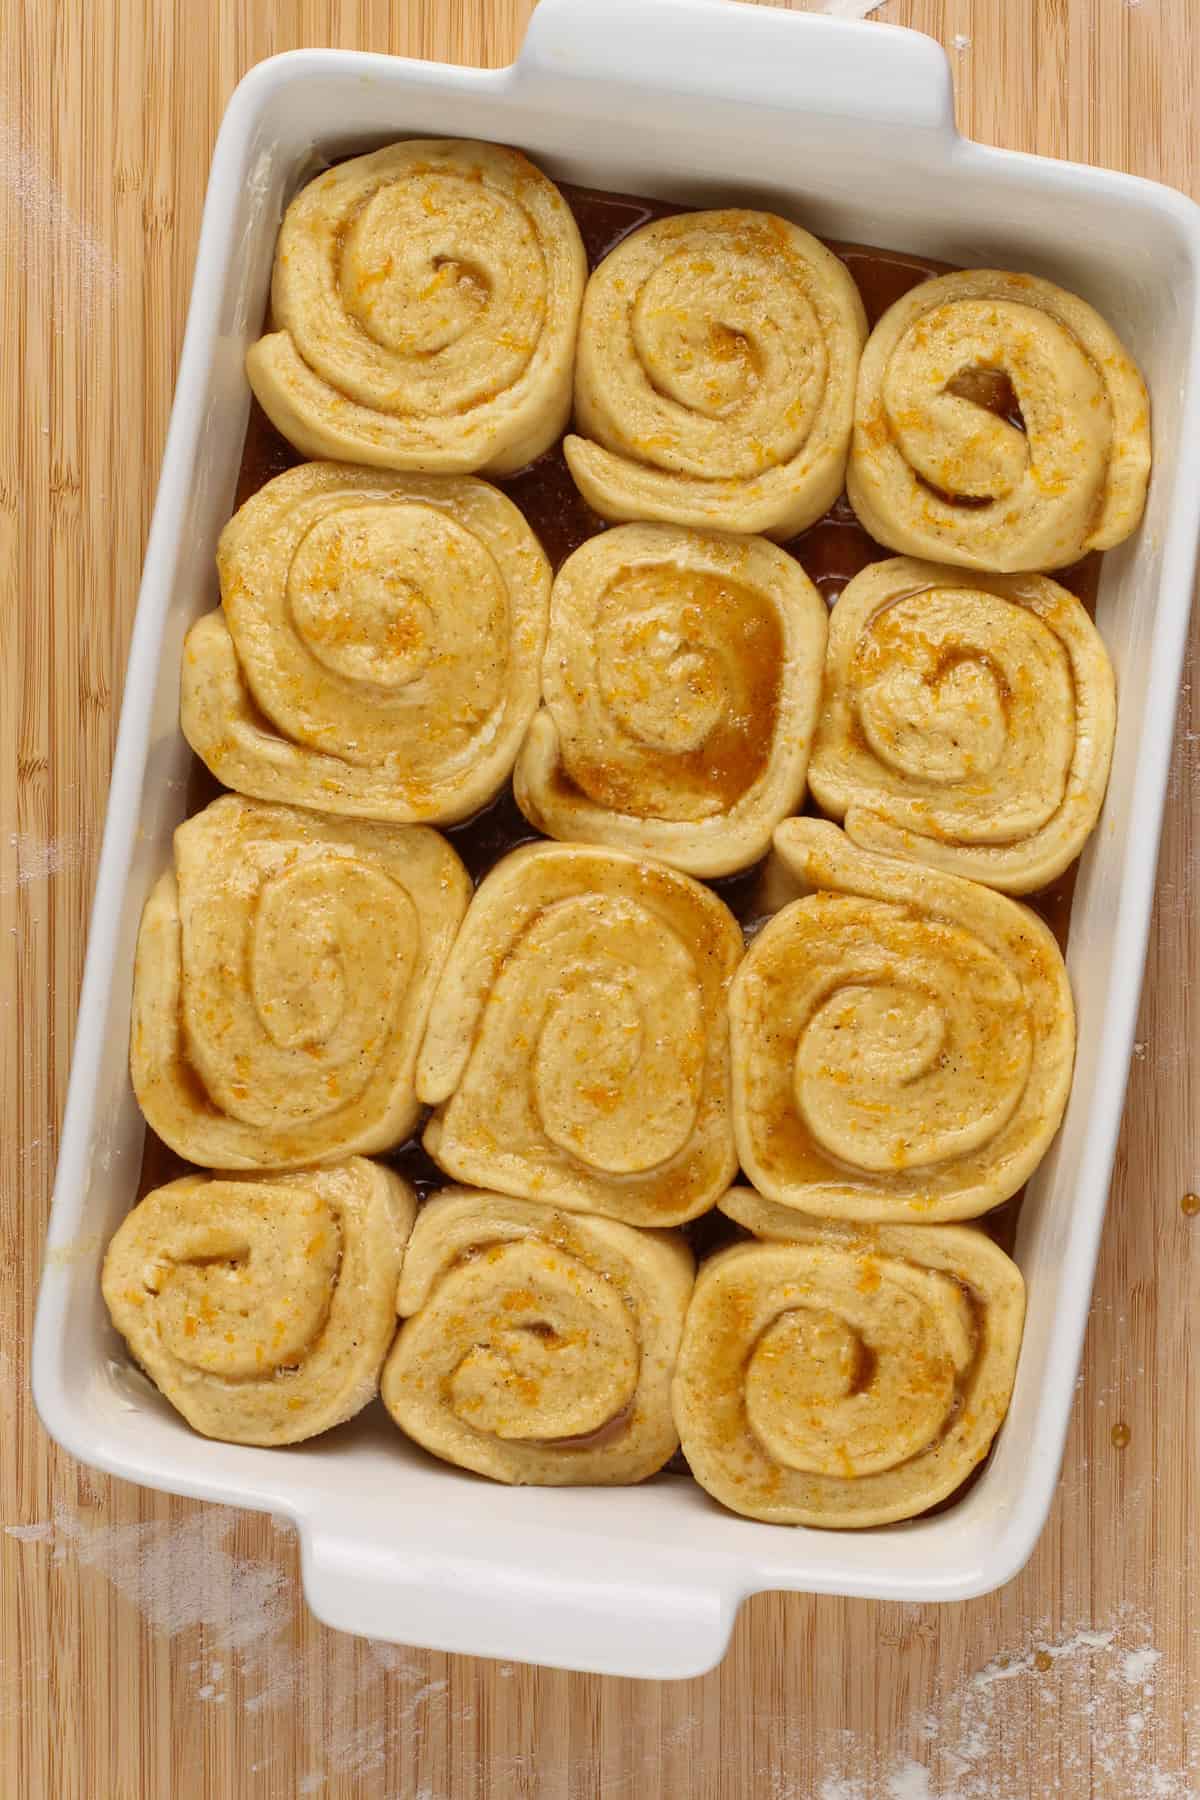 Risen orange rolls in a white baking dish, ready to go in the oven.